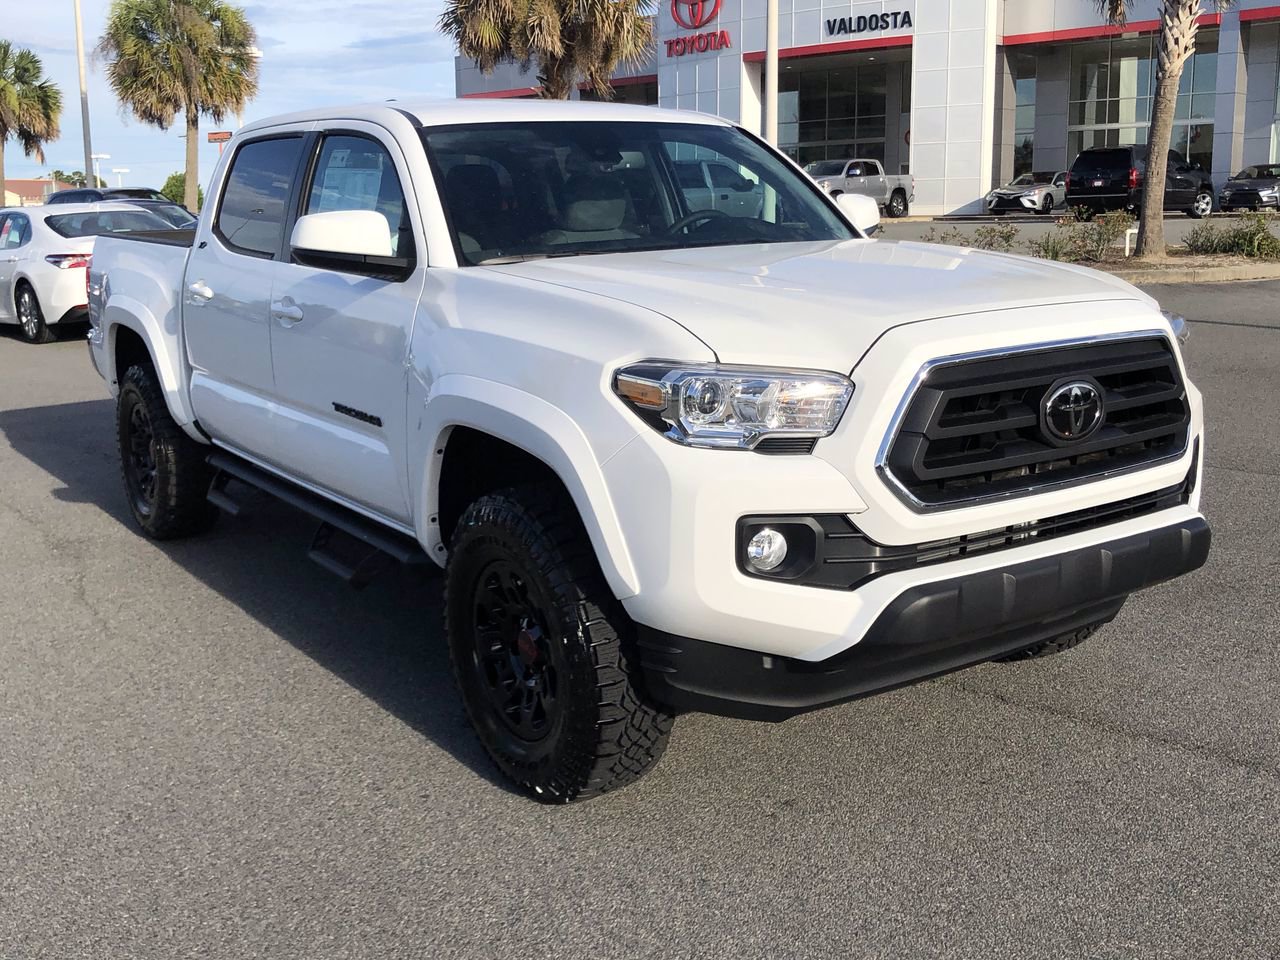 New 2020 Toyota Tacoma 2WD SR5 Double Cab V6 Crew Cab Pickup in